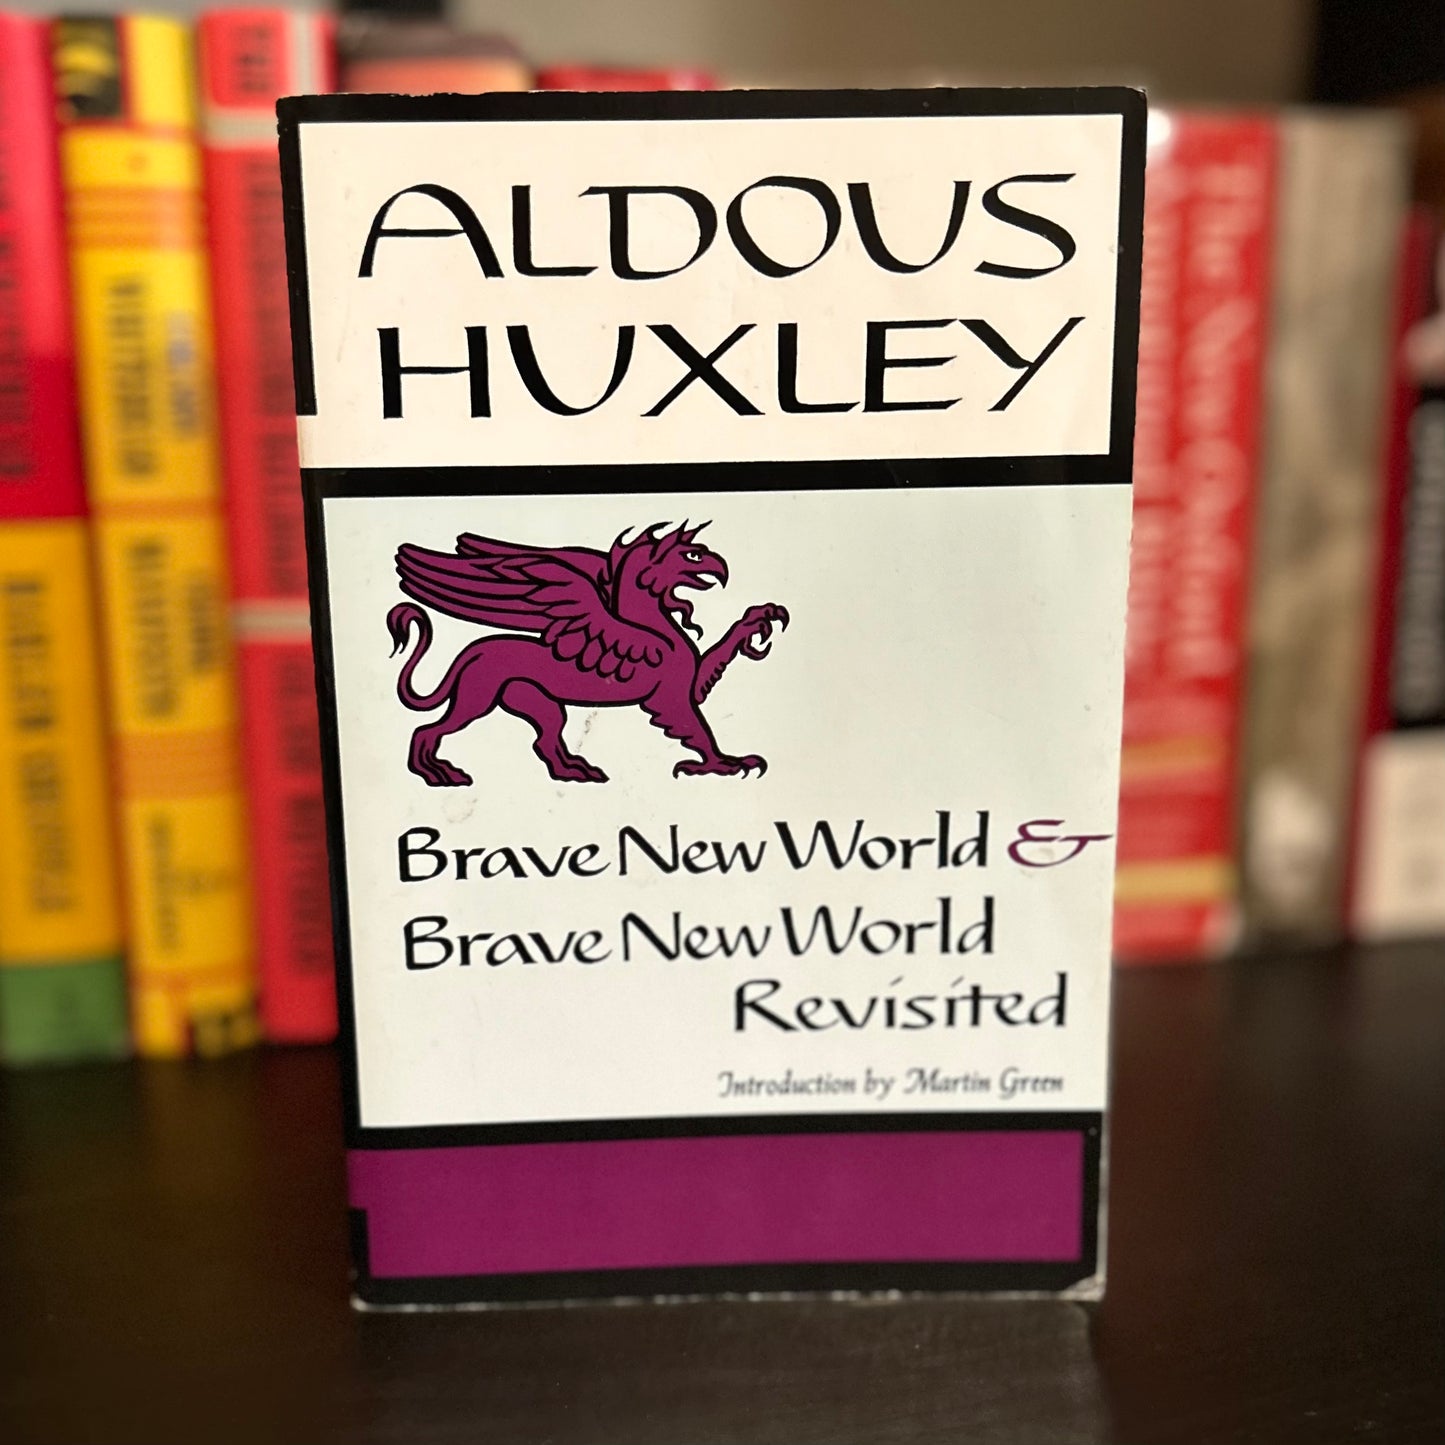 A Brave New World and A Brave New World Revisited - Aldous Huxley